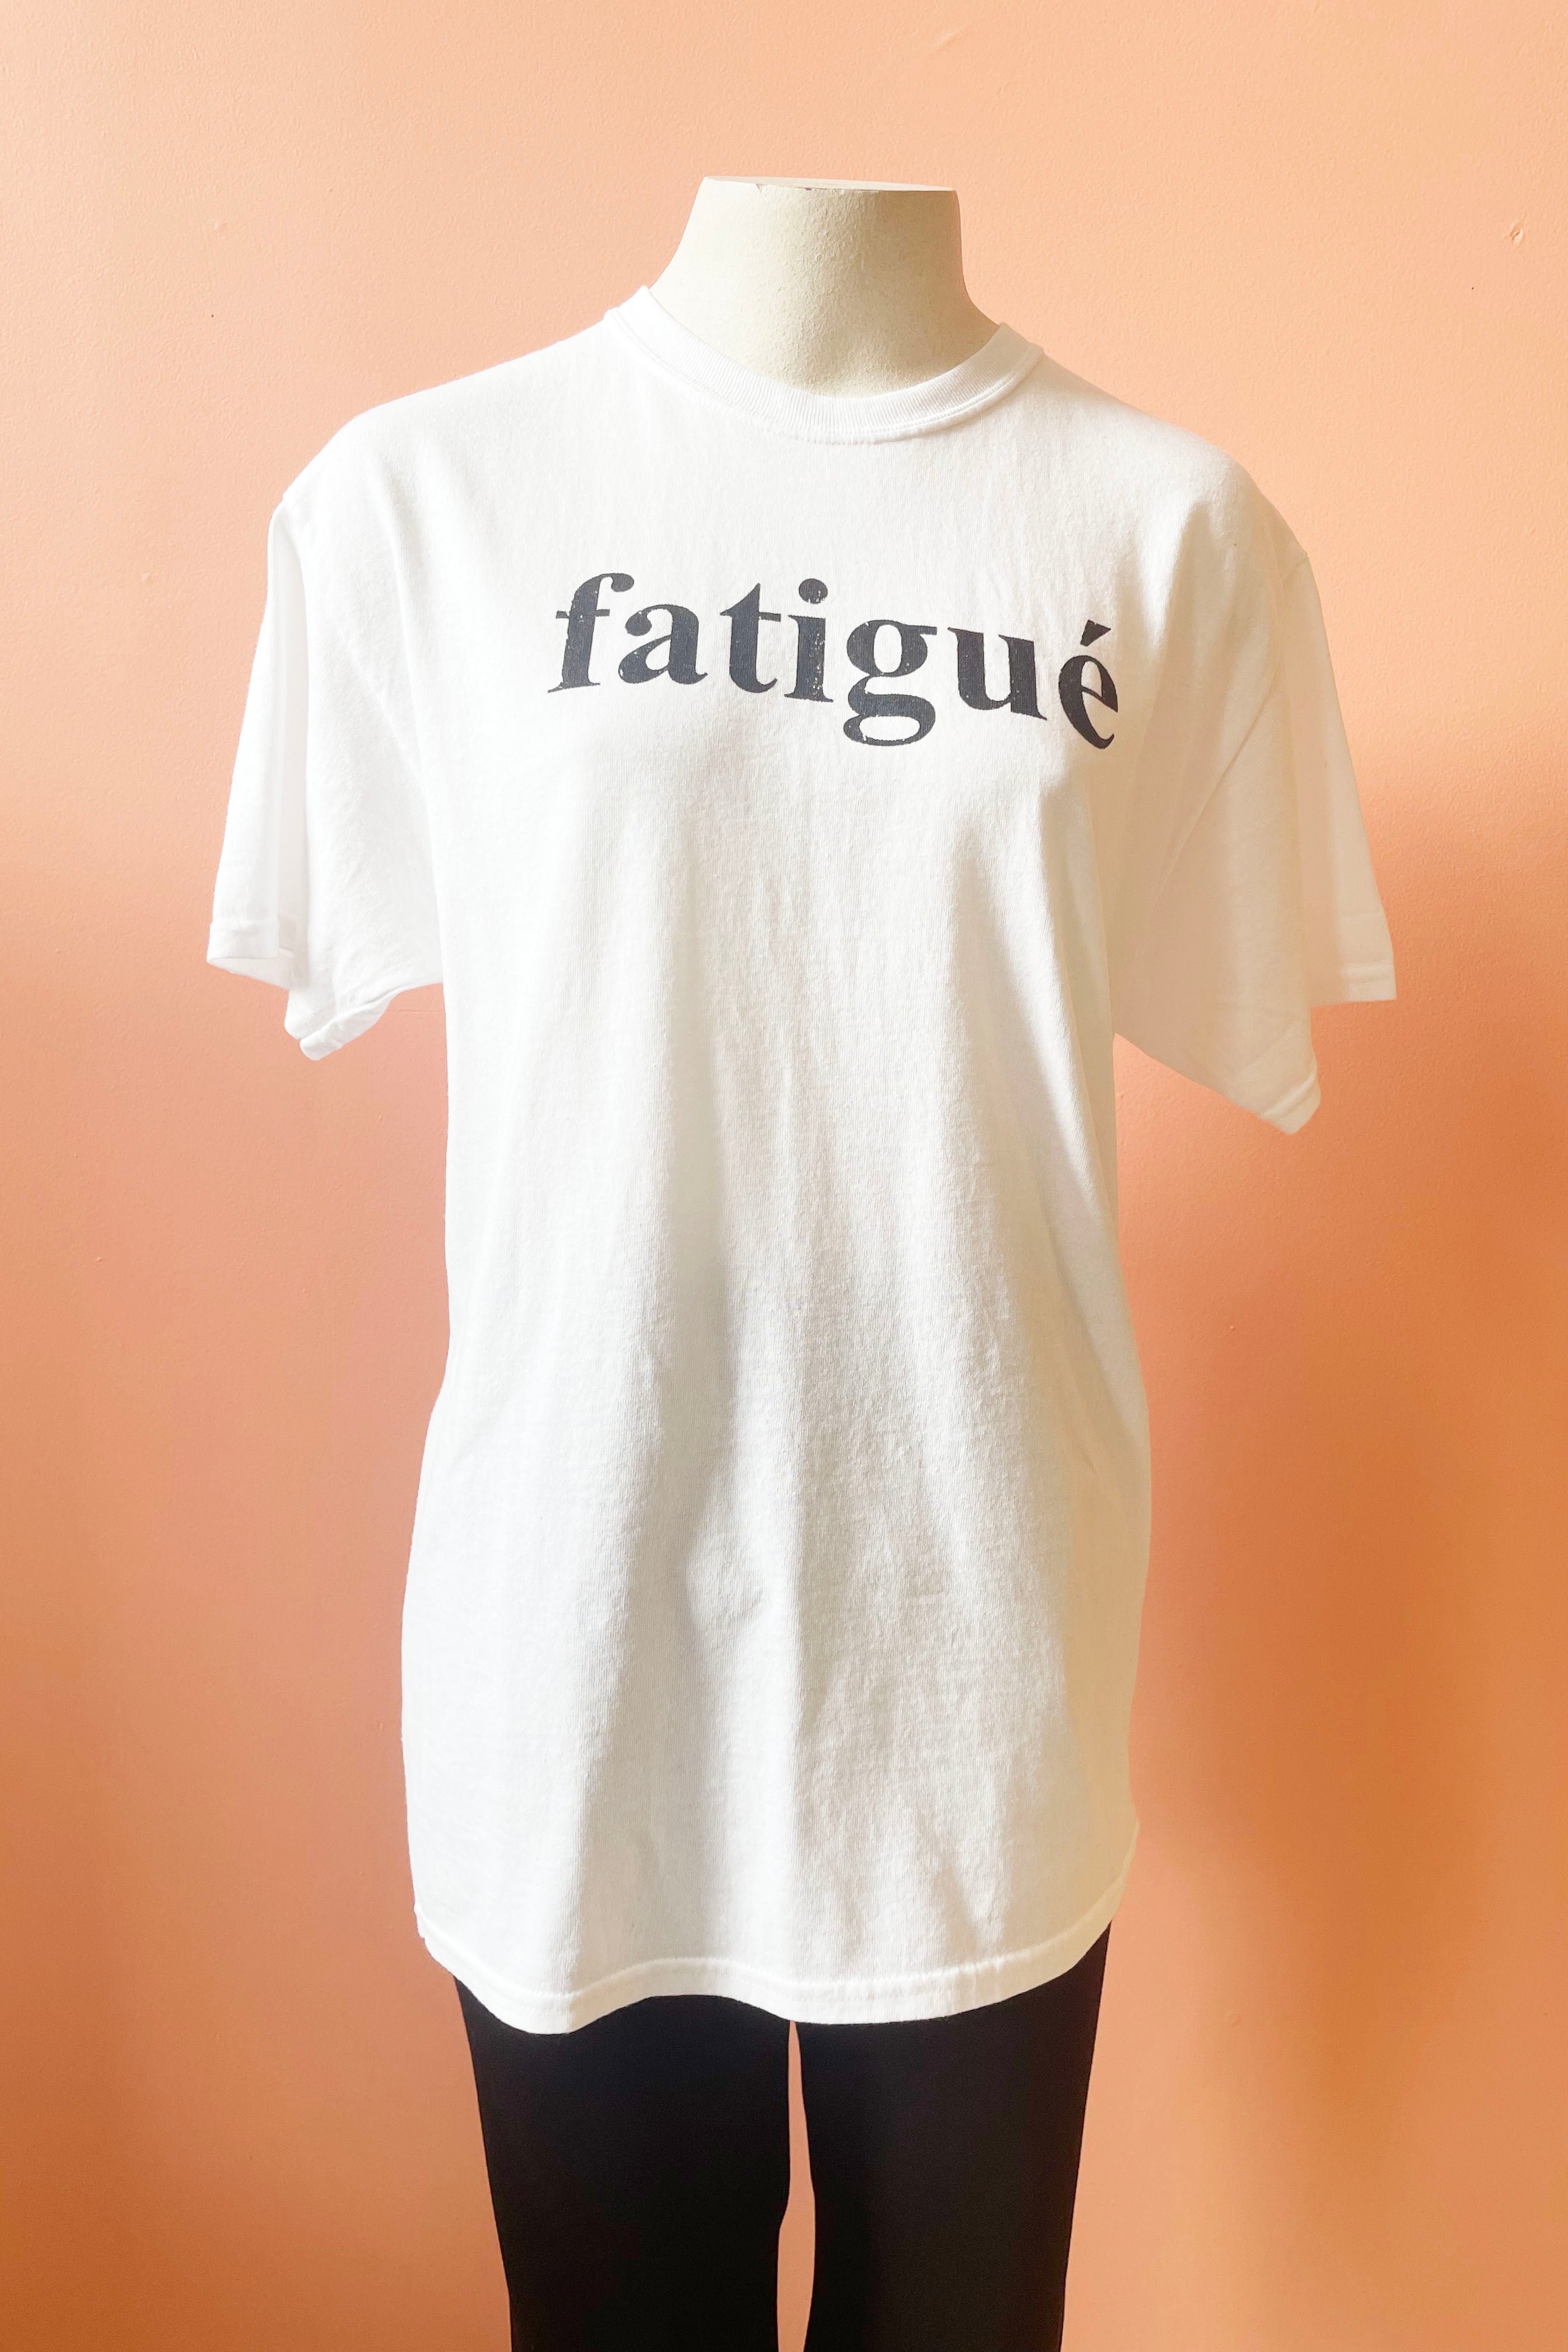 Fatigue Tee by Sara Duke, White, classic t-shirt with the word Fatigue printed on the front, 100% cotton, sizes S to XL, made in Toronto